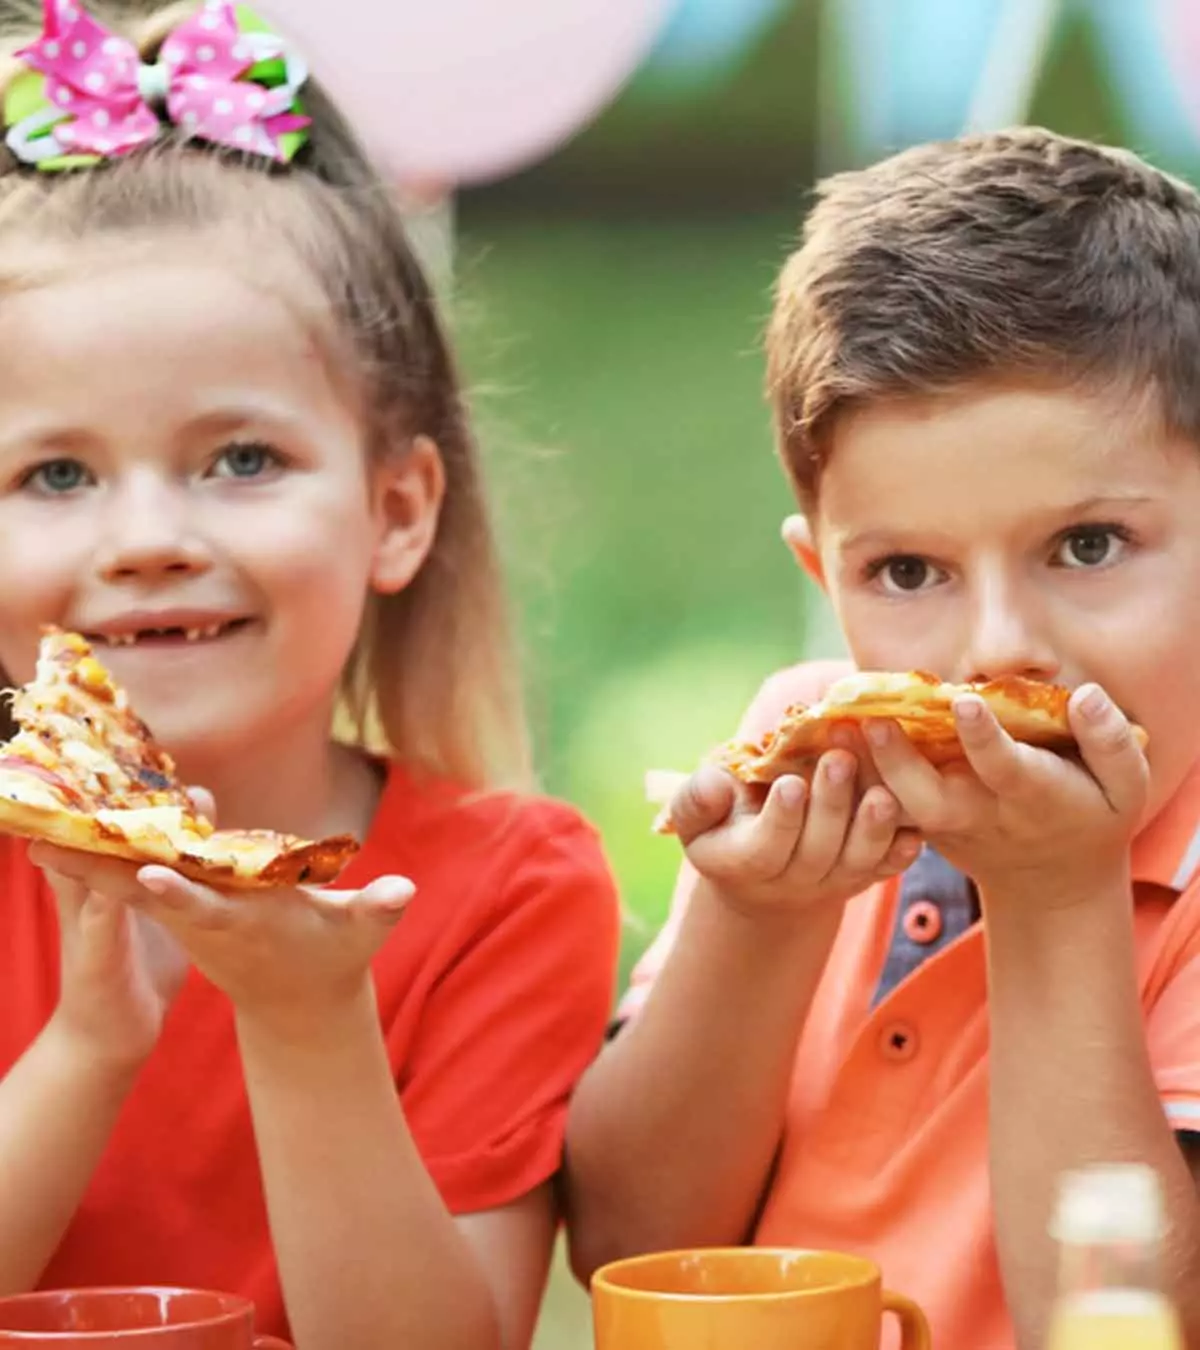 5 Healthy And Tasty Pizza Recipes For Kids